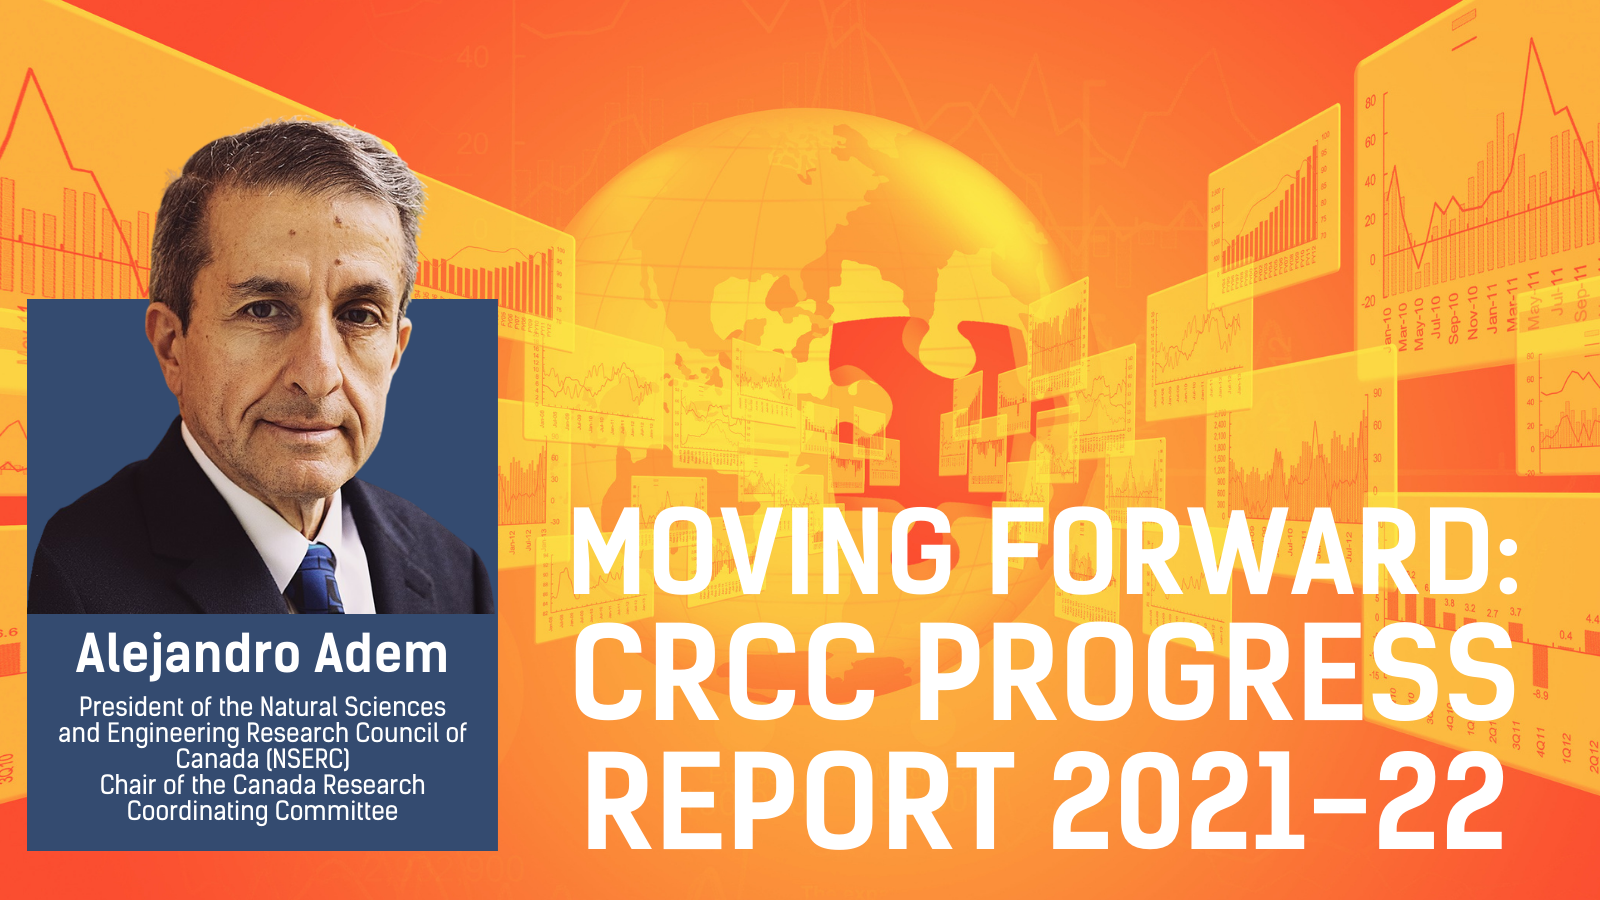 A banner with the title "Moving Forward: CRCC Progress Report 2021-22" with a headshot of an older white man